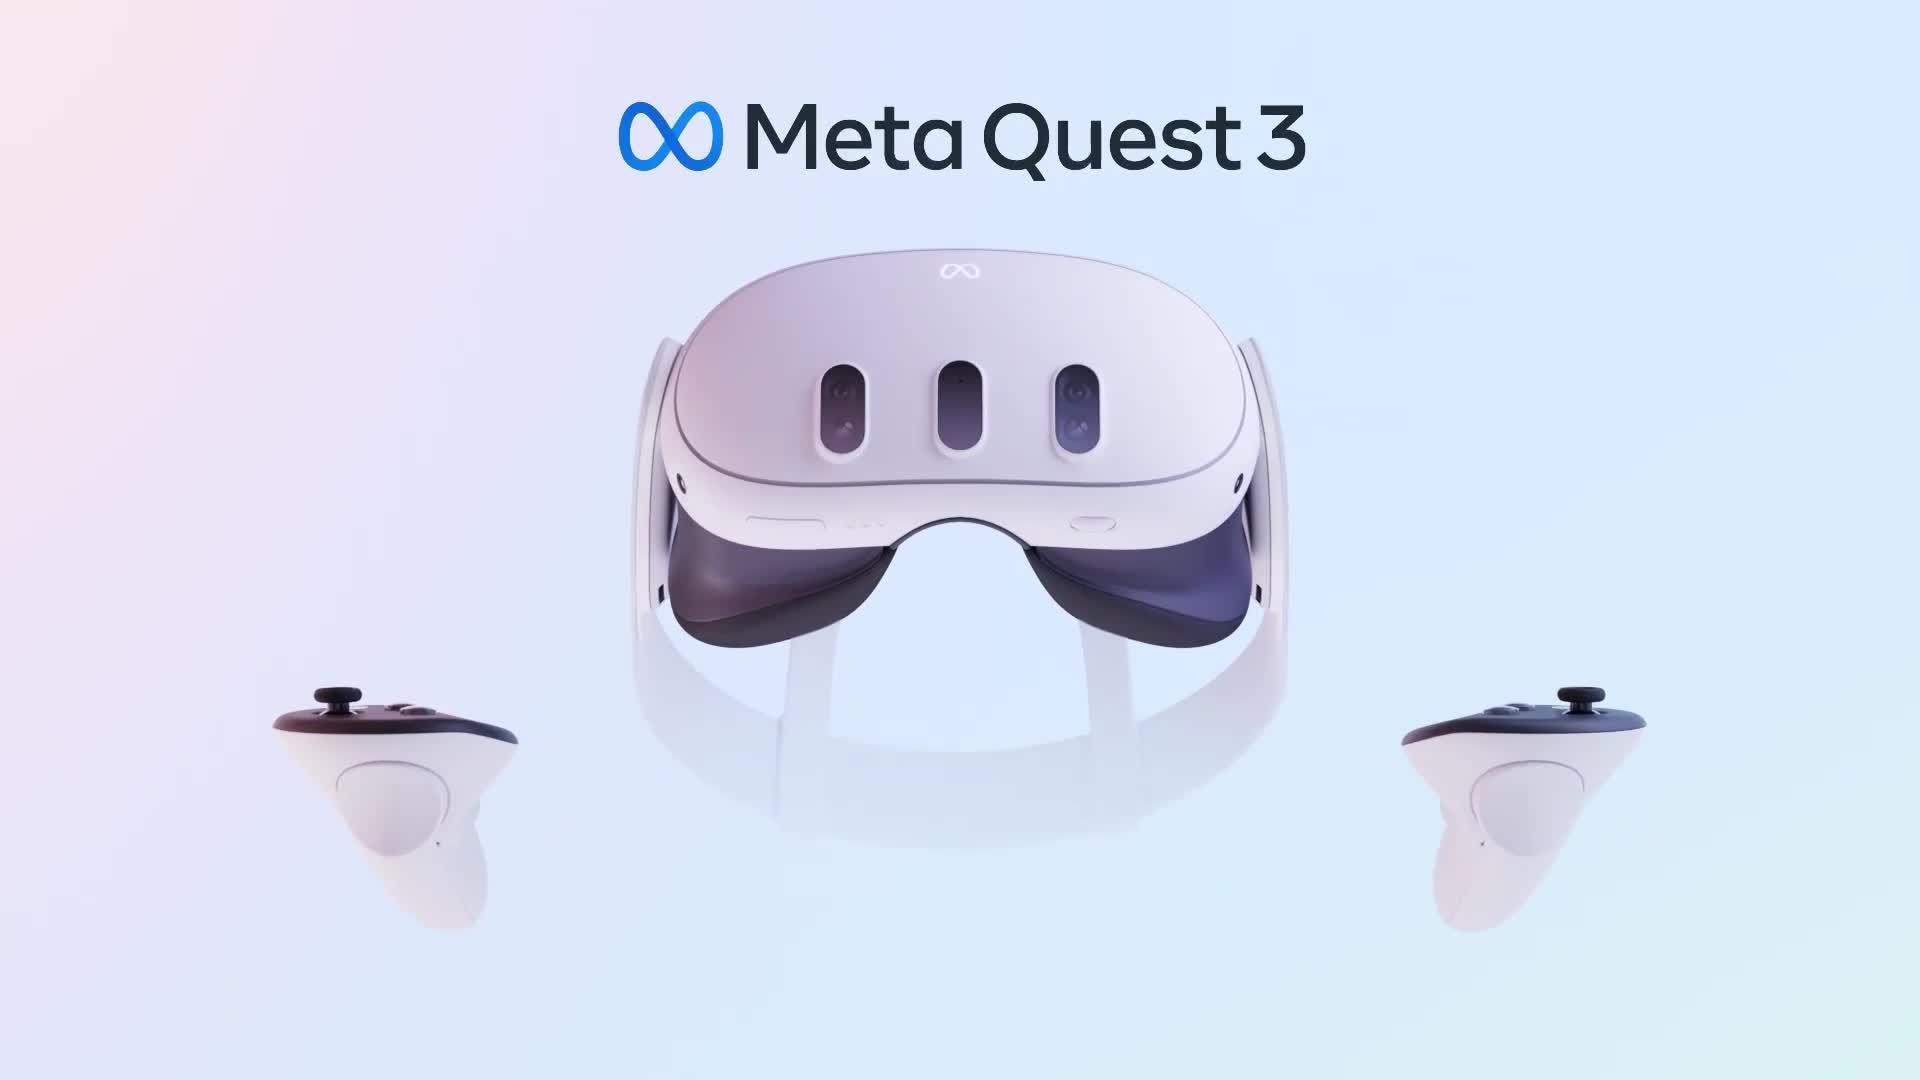 Meta Quest 3 128GB - Breakthrough mixed reality - Powerful 